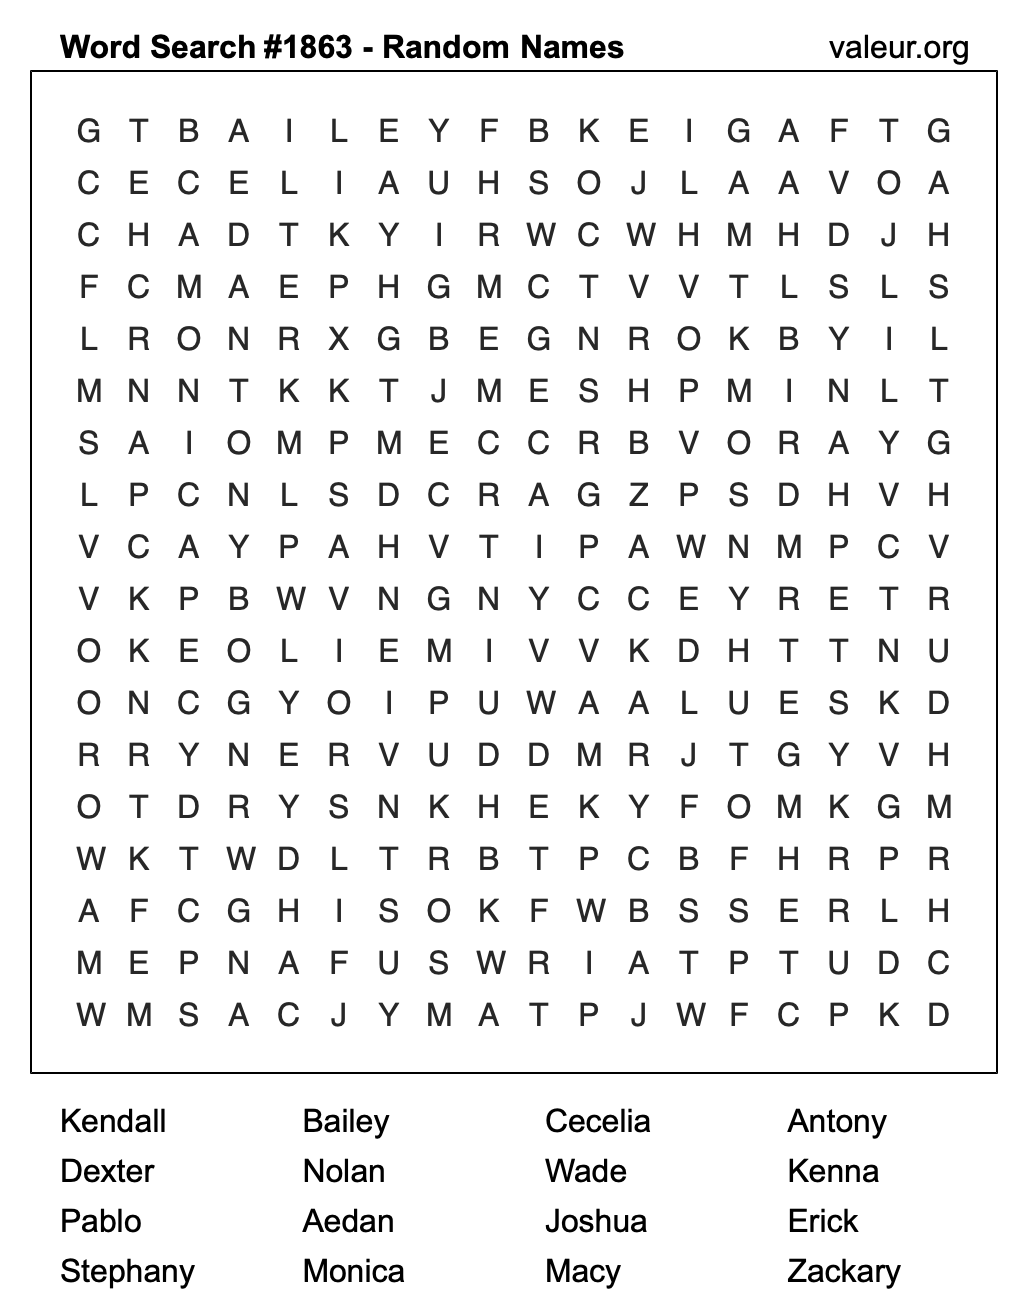 Word Search Puzzle with names #1863